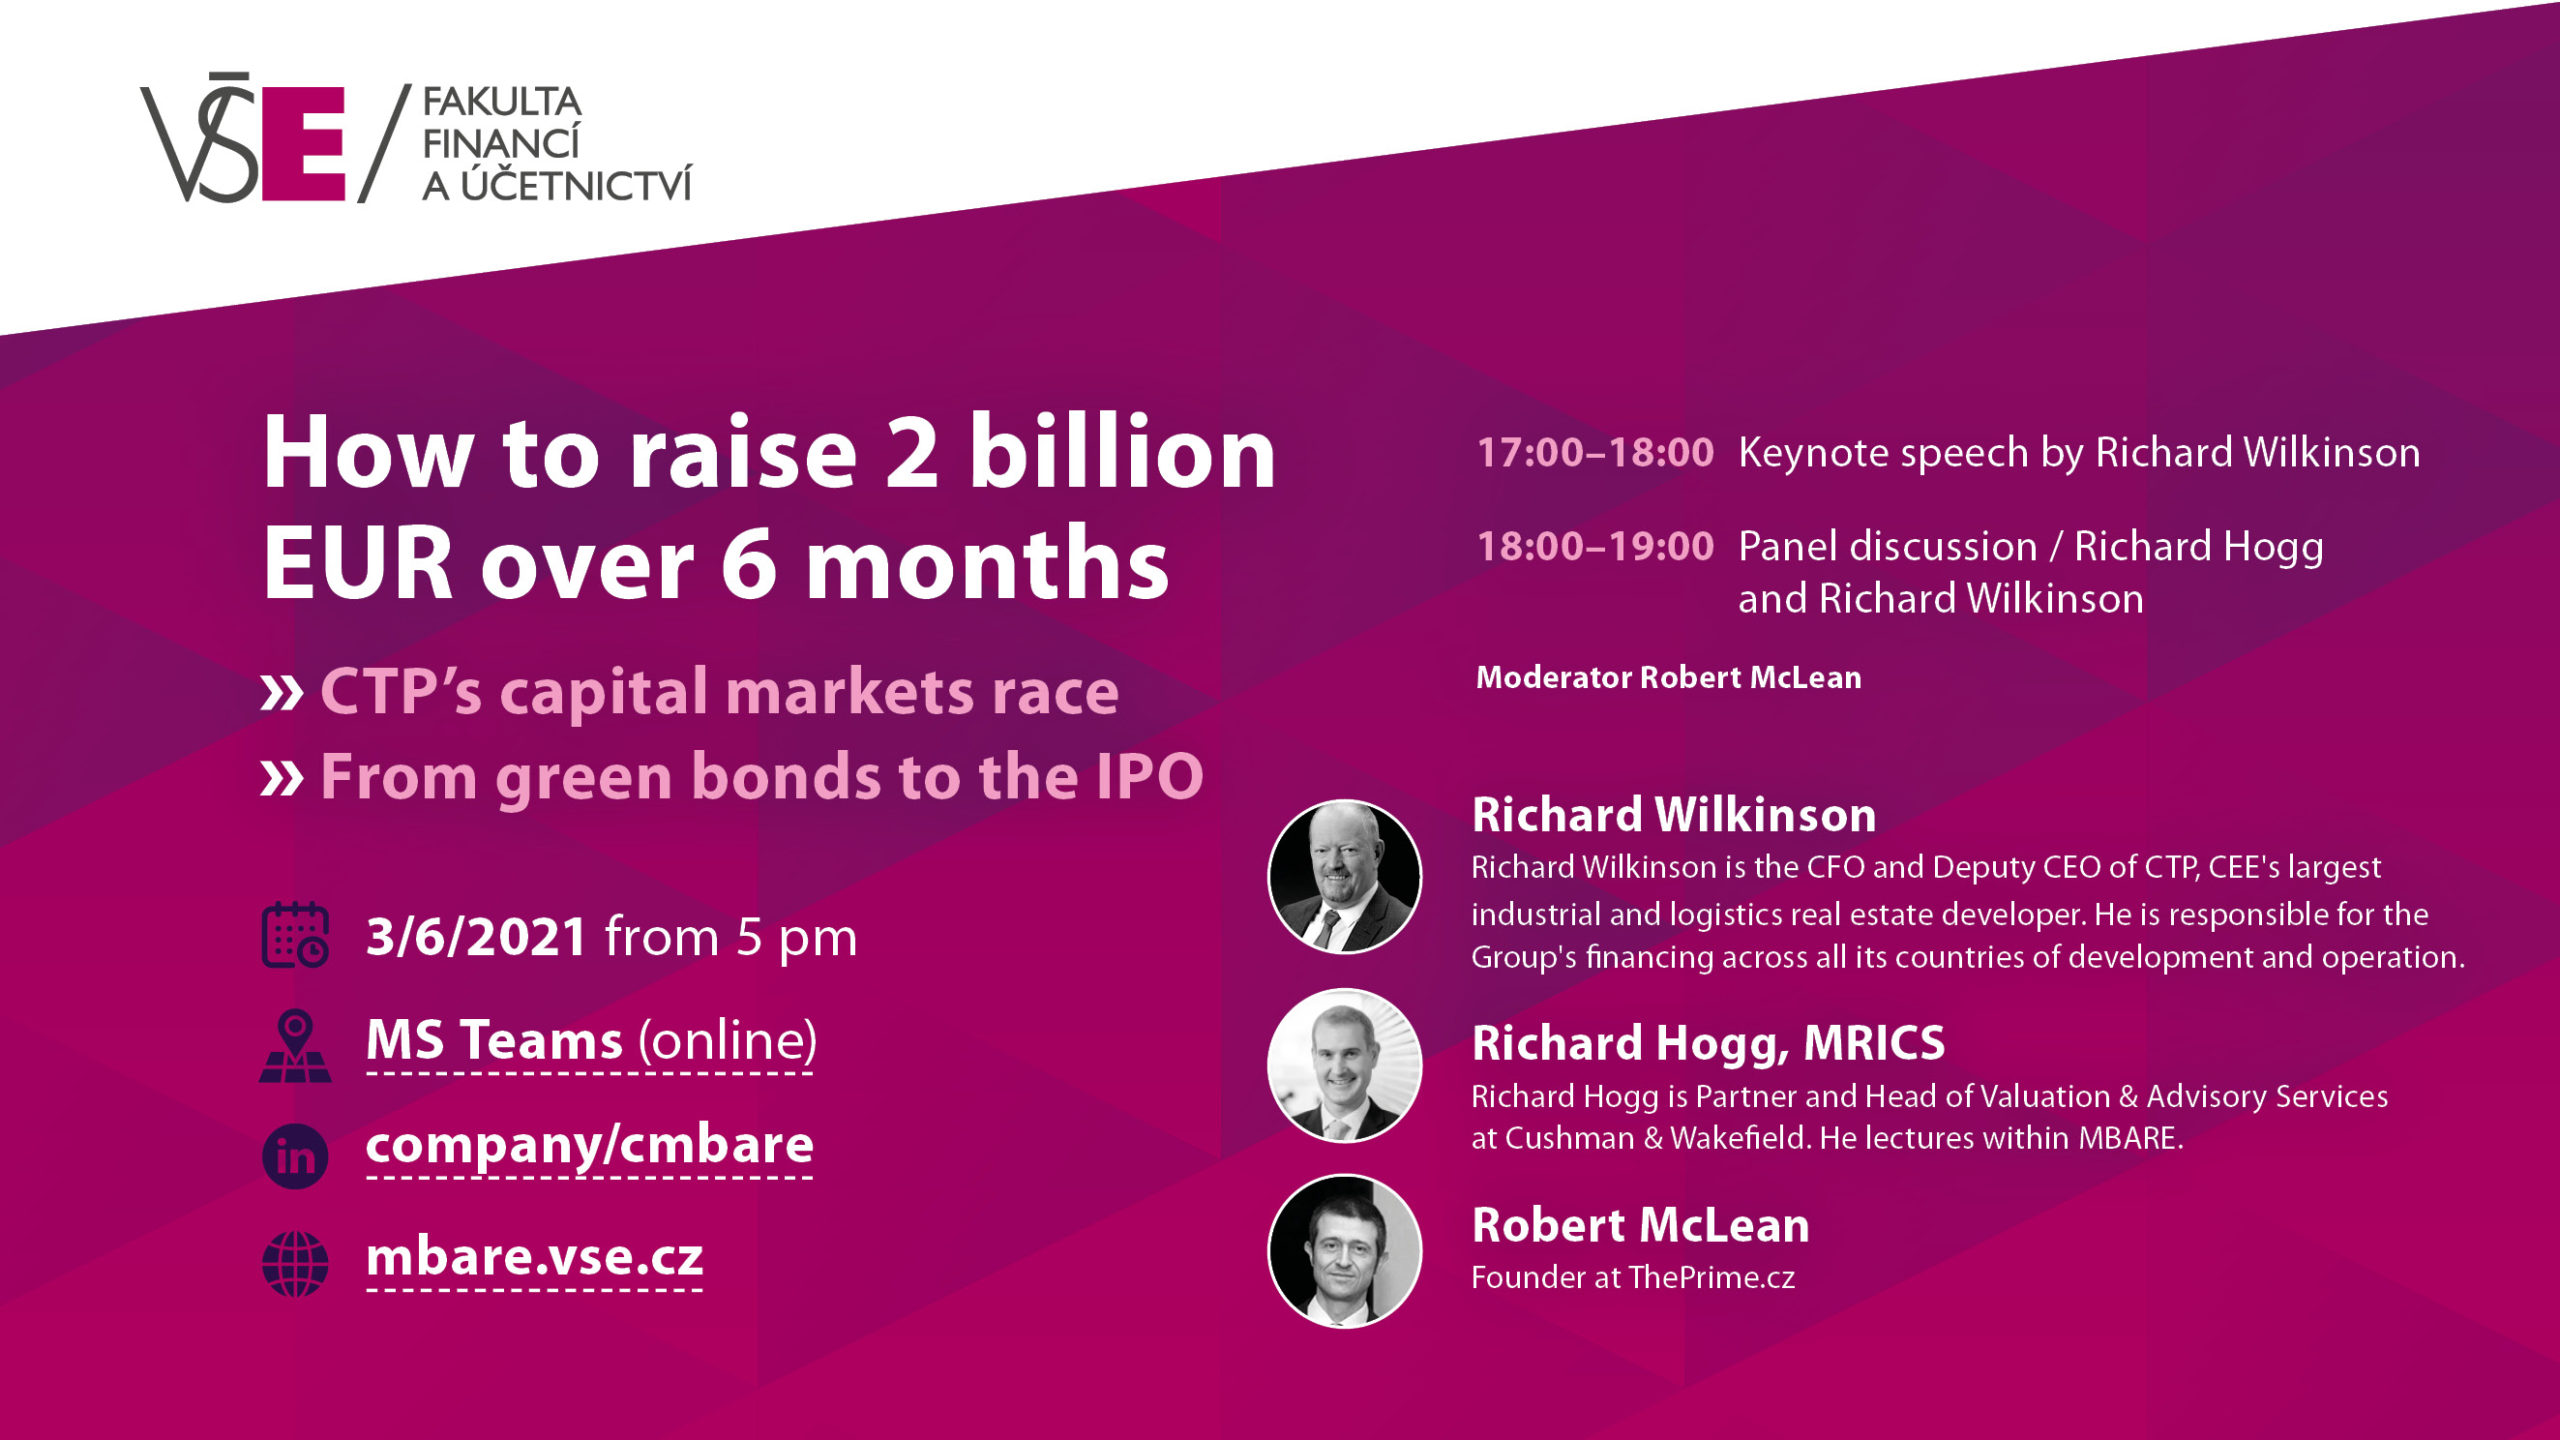 How to raise 2 billion EUR over 6 months.(CTP’s capital markets race;  From green bonds to the IPO) 3.6.2021 at 17:00 CEST